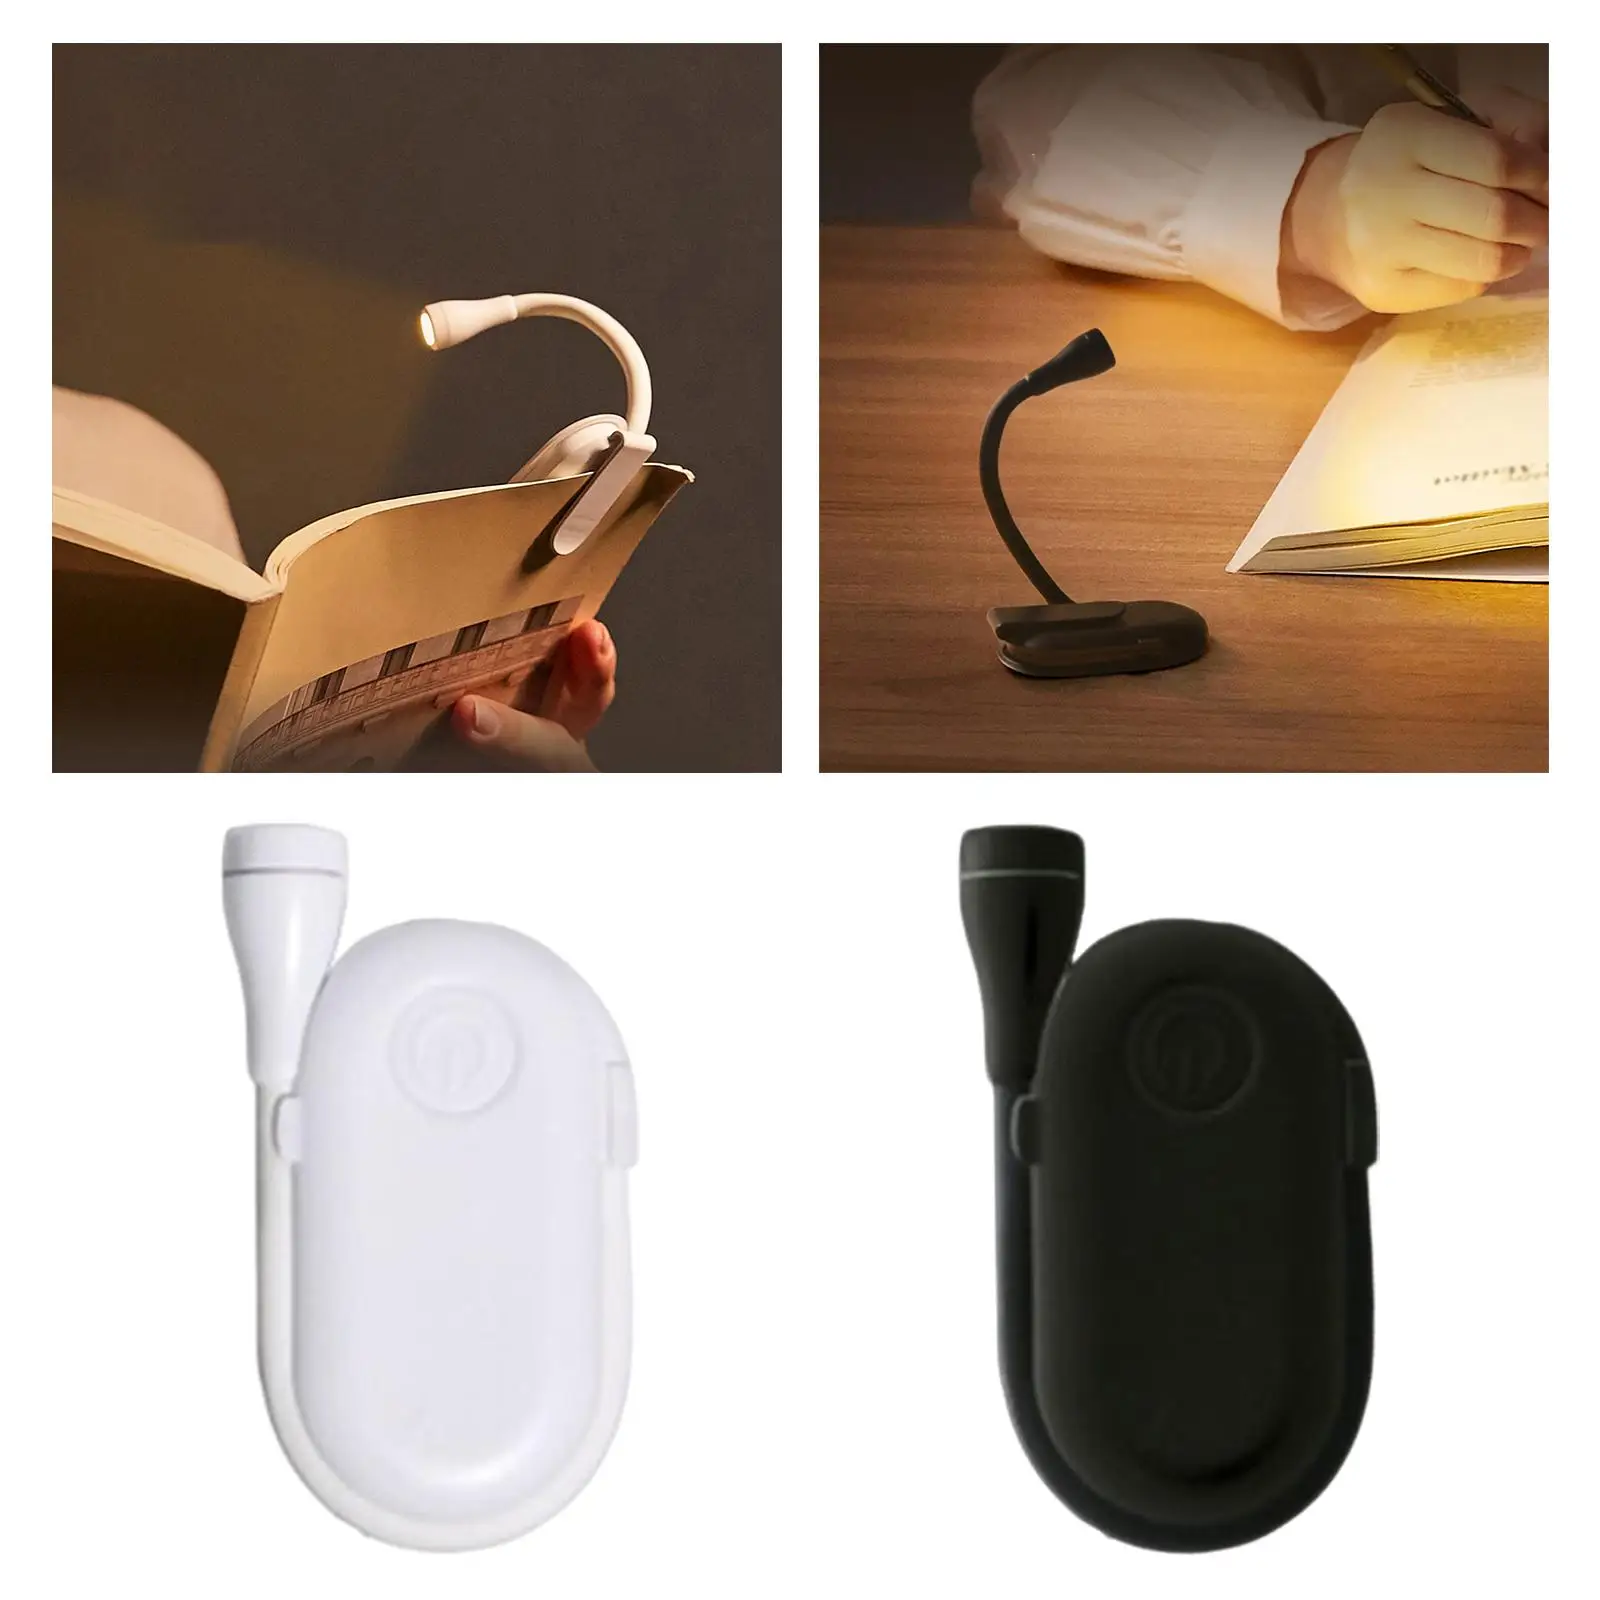 Portable Reading Light Book Light Rechargeable Reading Lamp Night Desk Lamp Eye Caring for Books Working Desktop Bed Music Stand